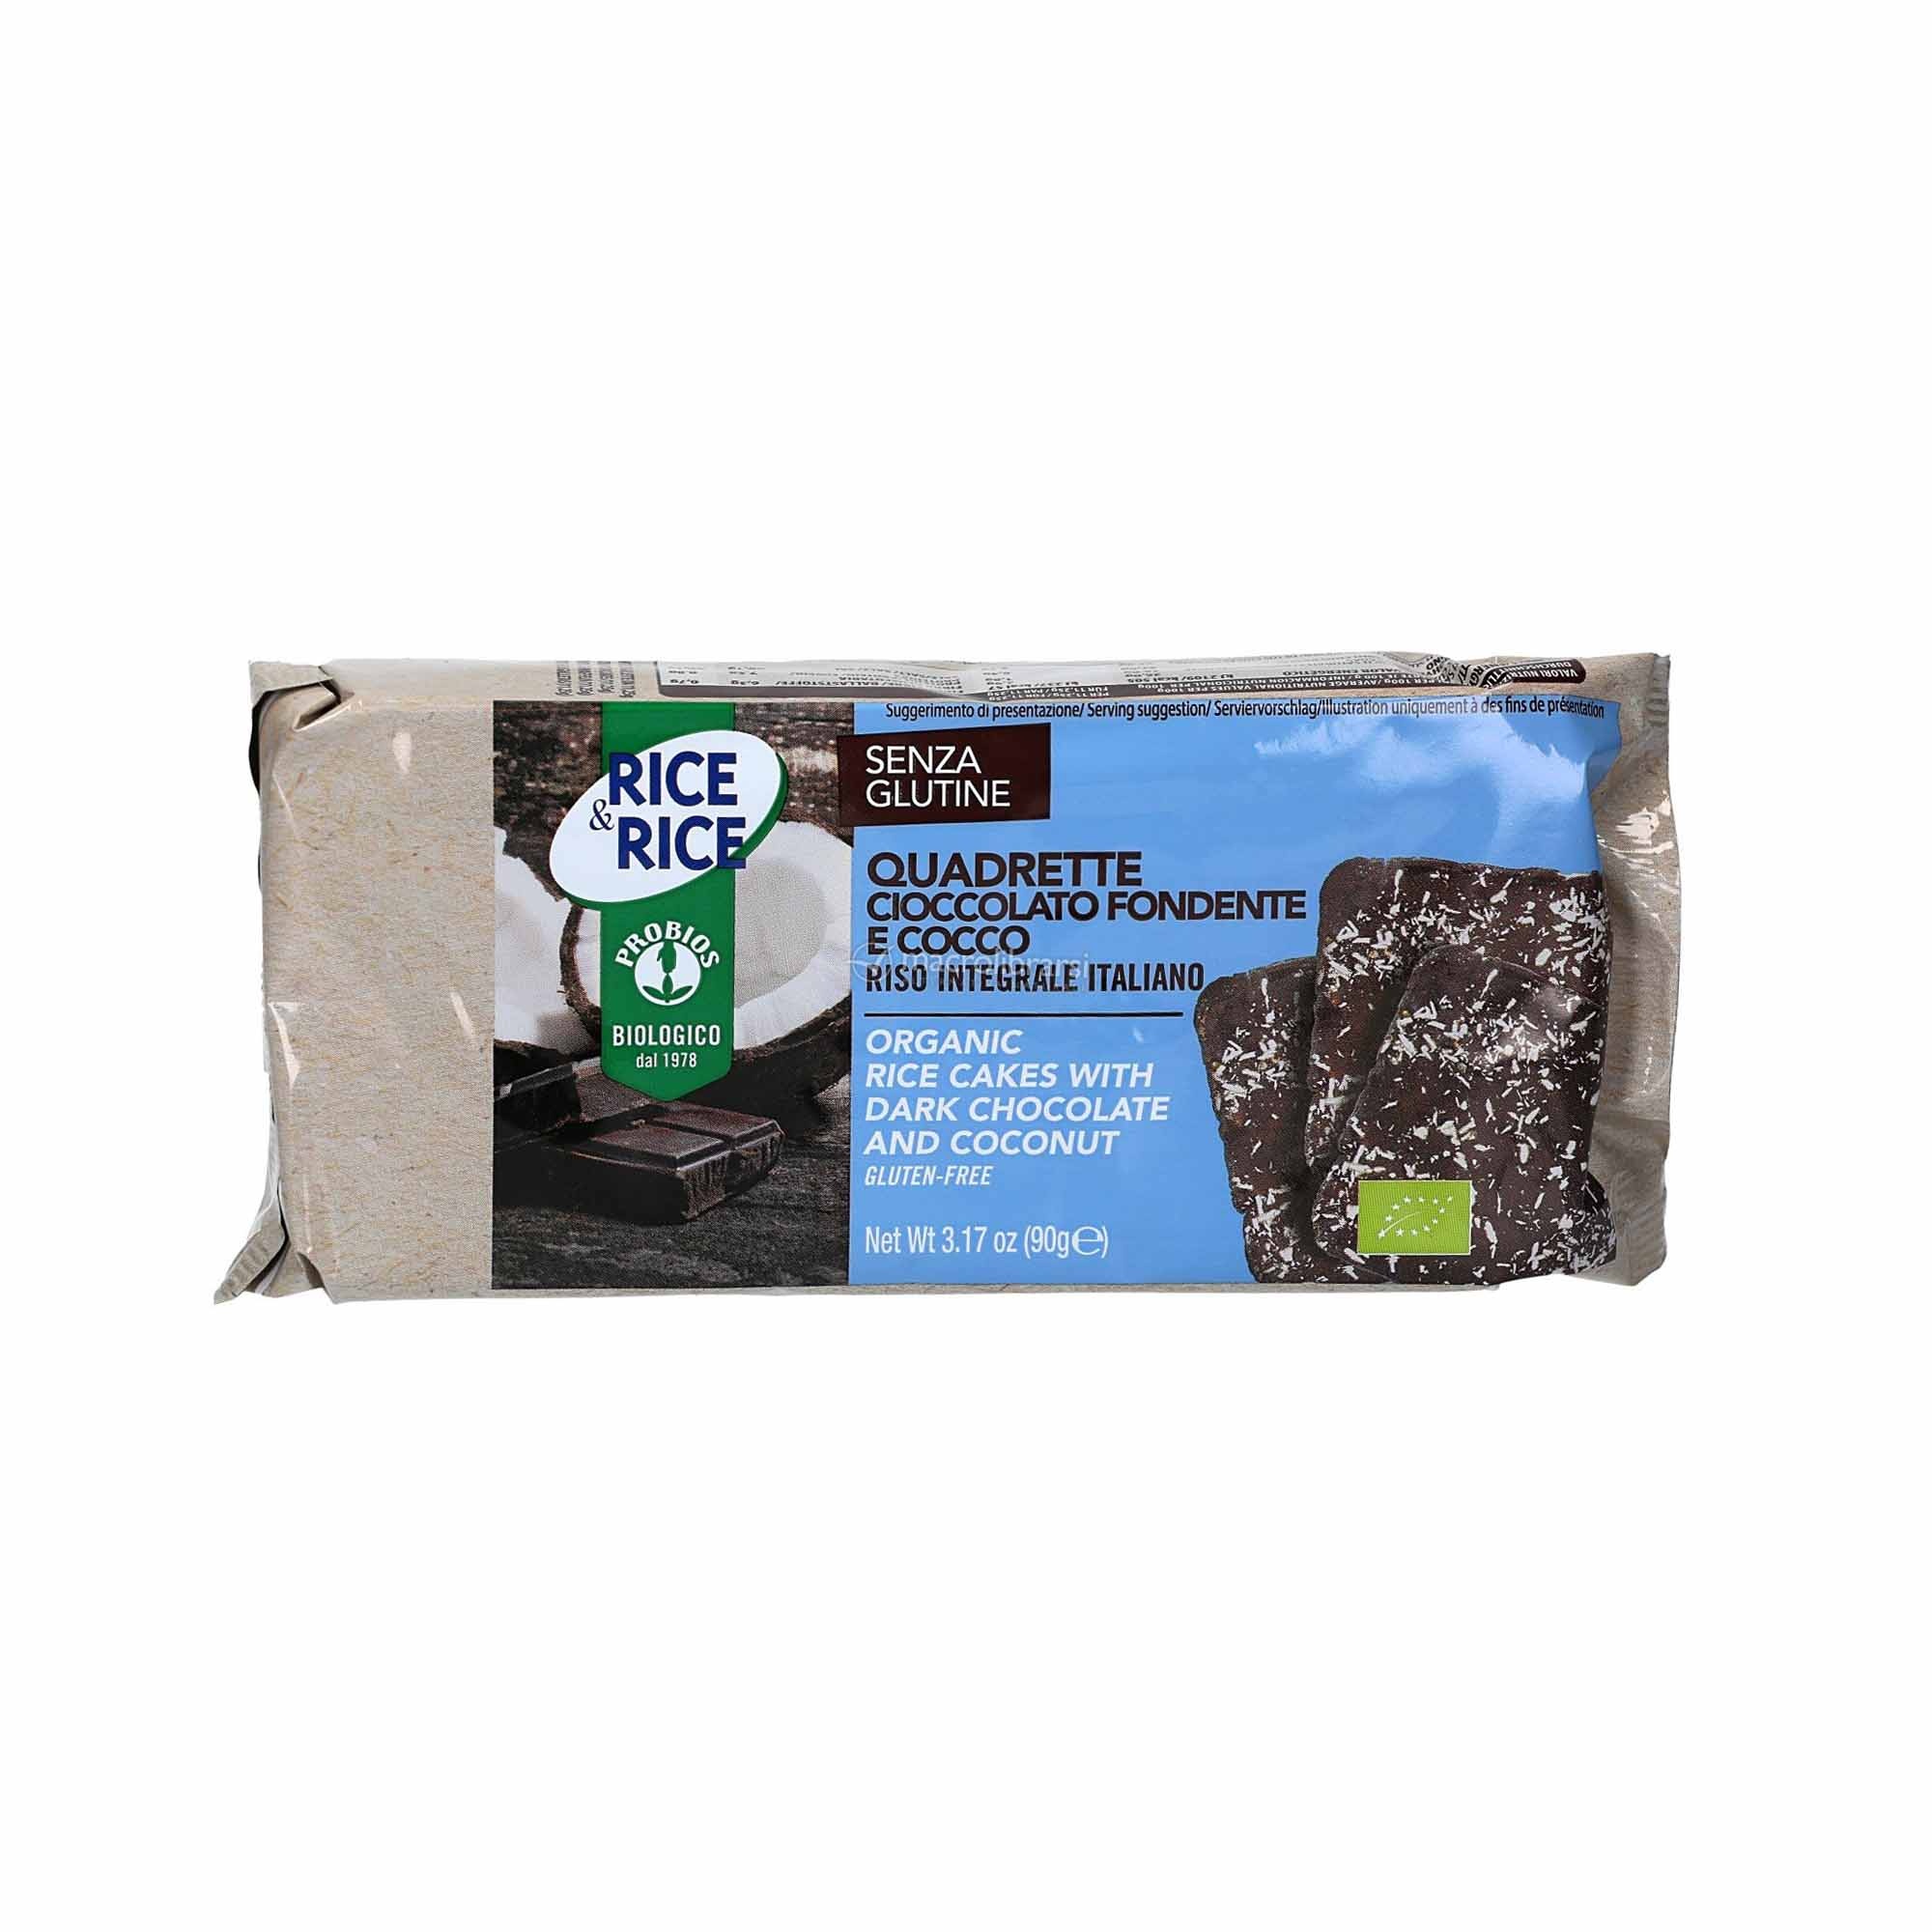 Gluten free rice cakes with dark chocolate coating and coconut